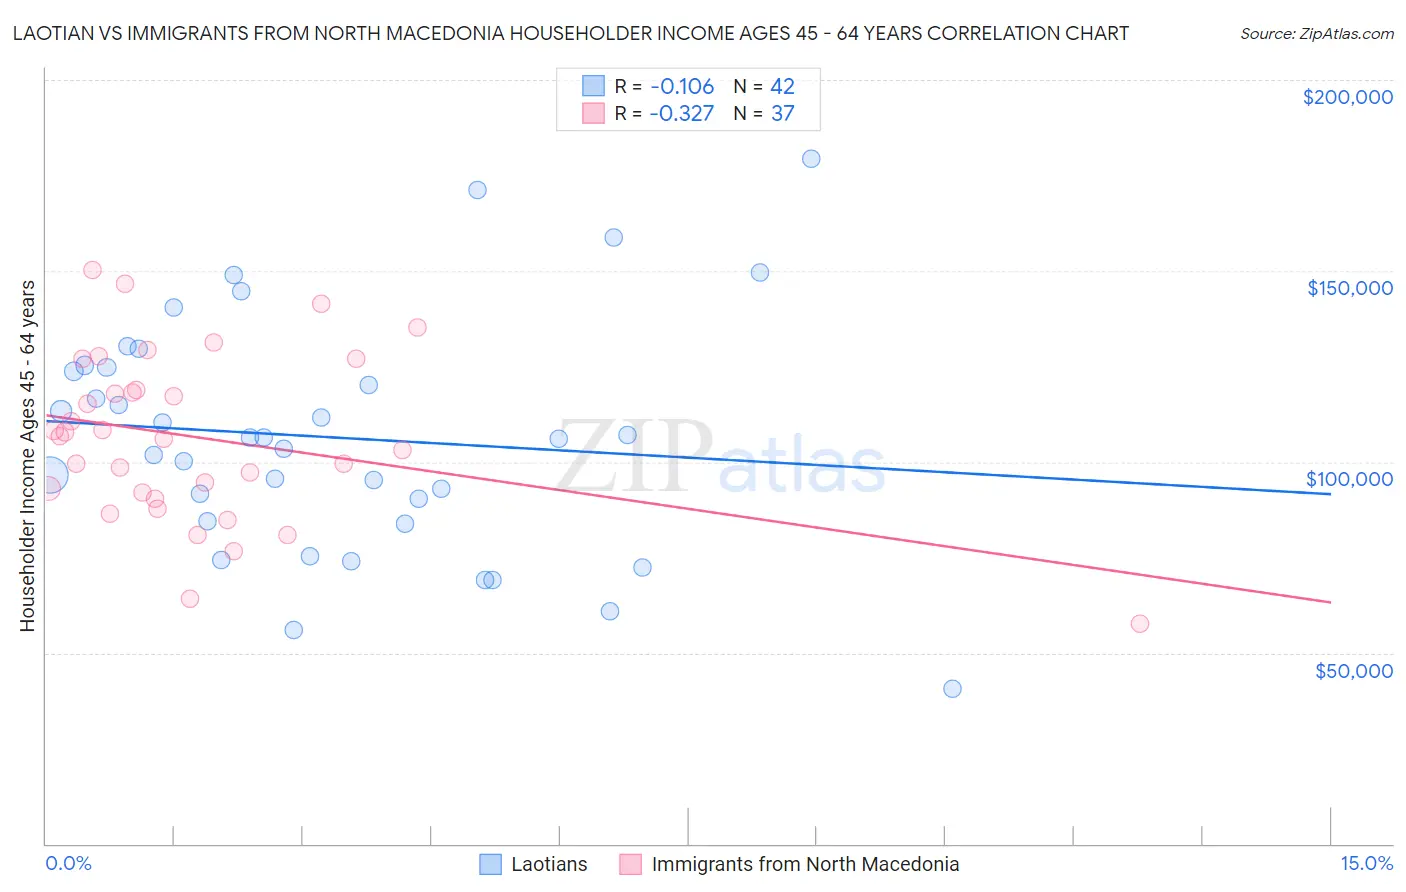 Laotian vs Immigrants from North Macedonia Householder Income Ages 45 - 64 years